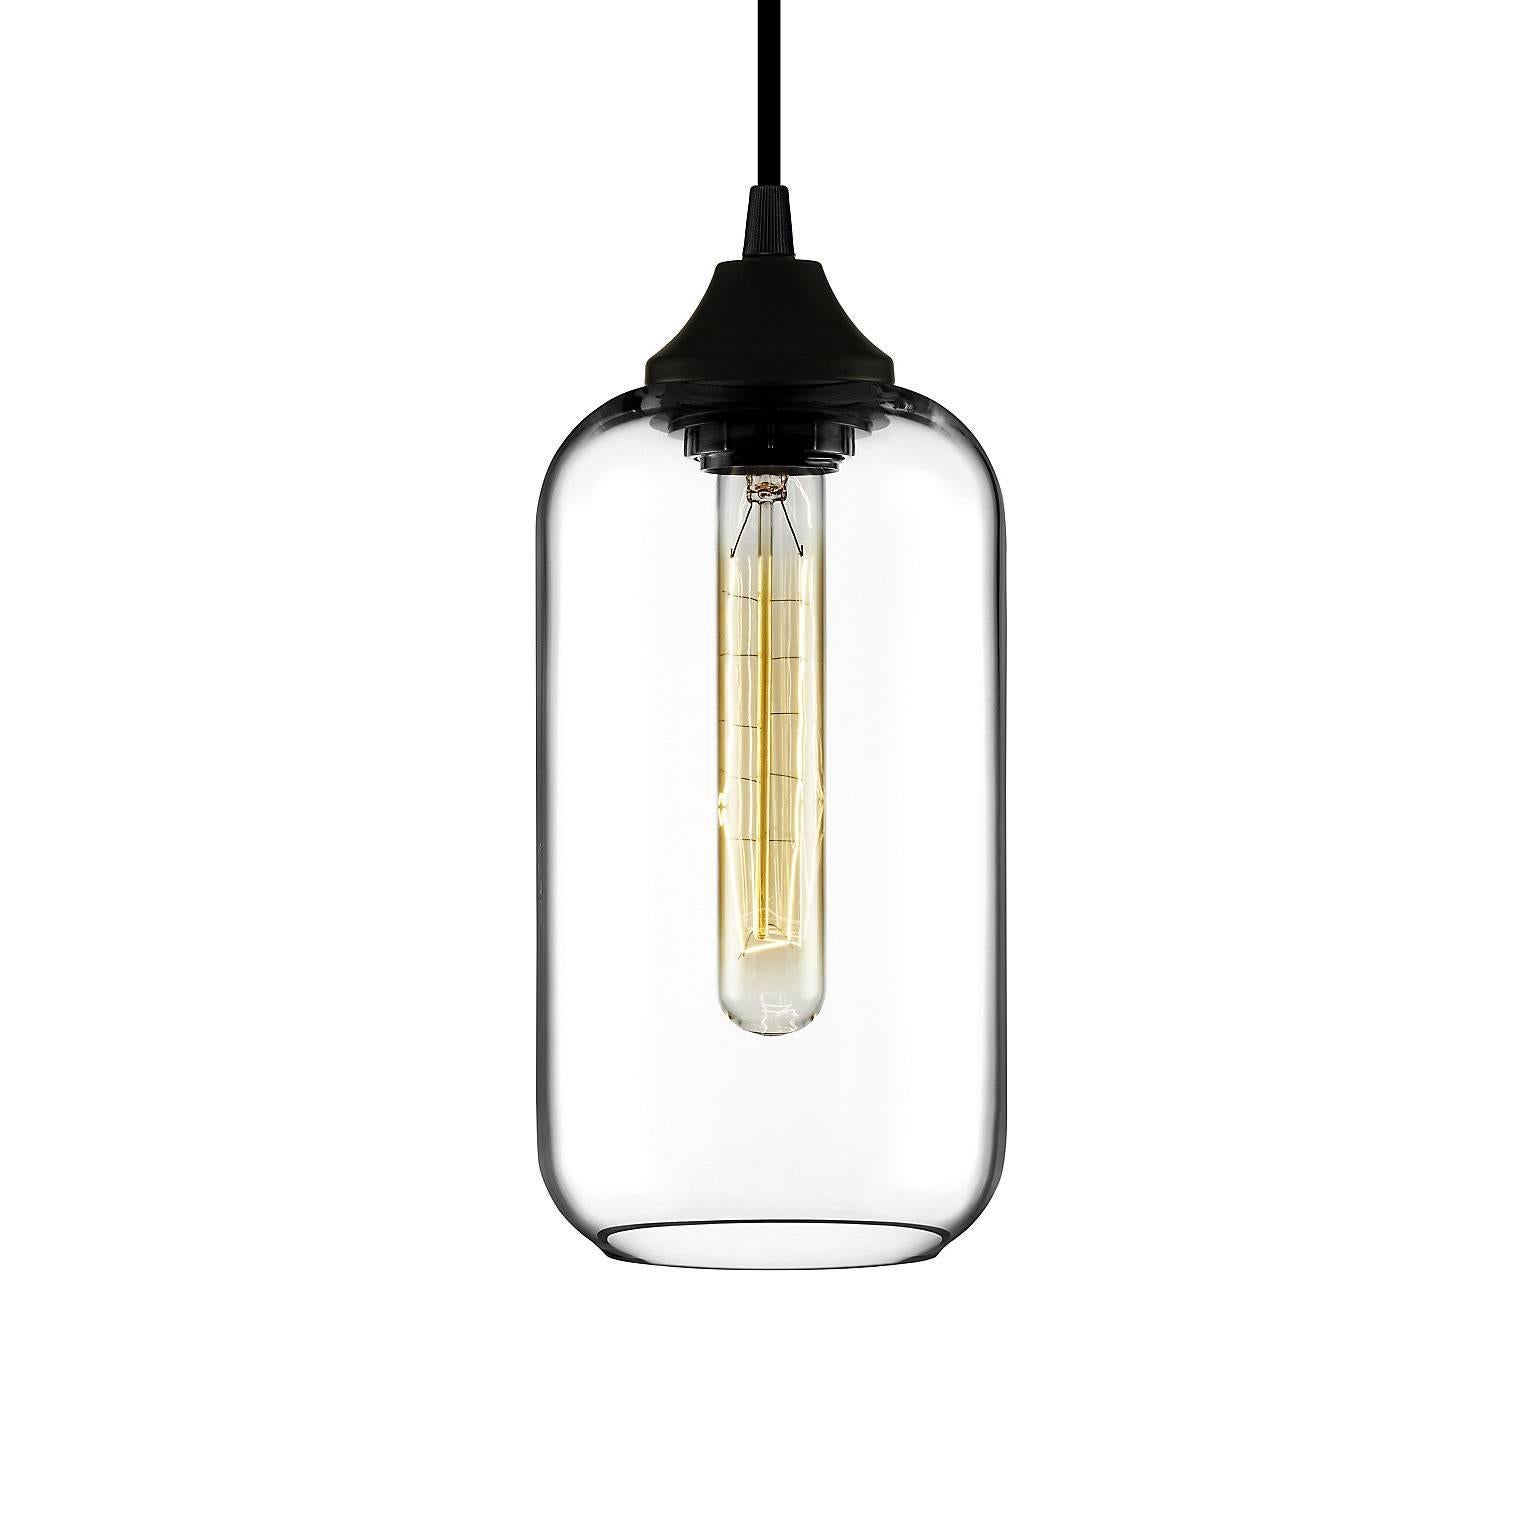 Helio Prisma Crystal Handblown Modern Glass Pendant Light, Made in the USA For Sale